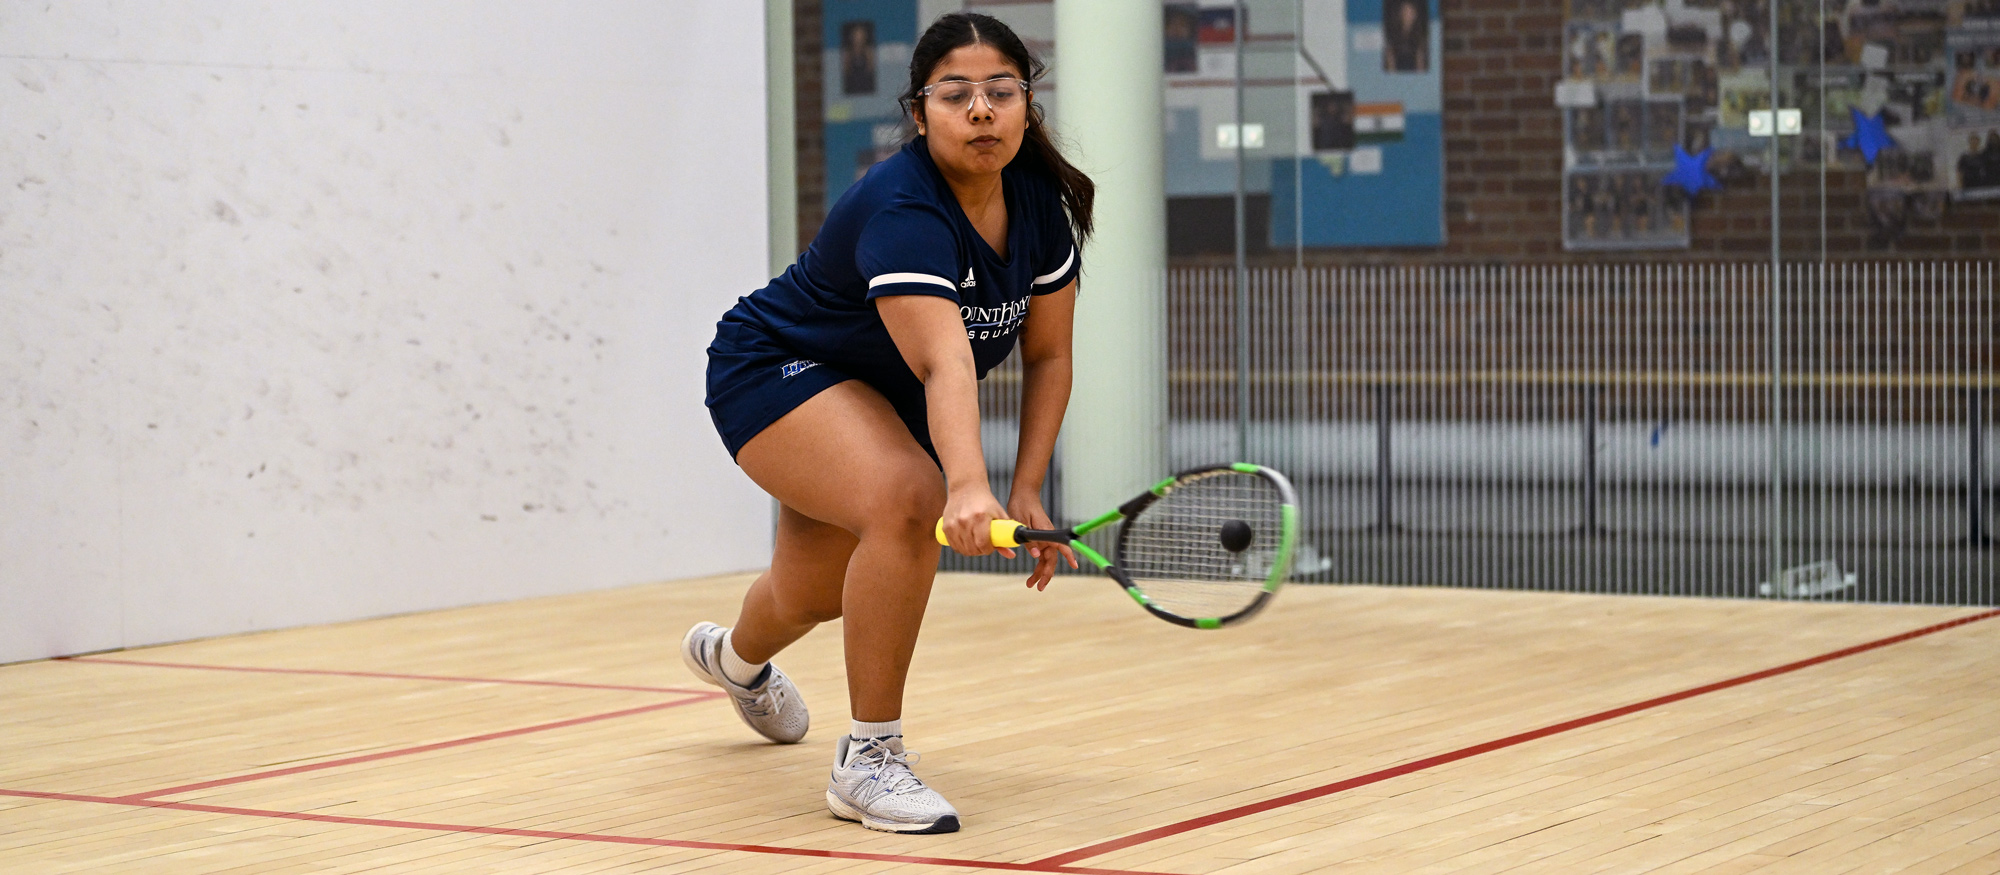 Dnyaneshwari Haware had a 3-0 day in the middle of Mount Holyoke's lineup as the Lyons rolled past Smith, Vassar and Wellesley on Feb. 11, 2023. (RJB Sports file photo)